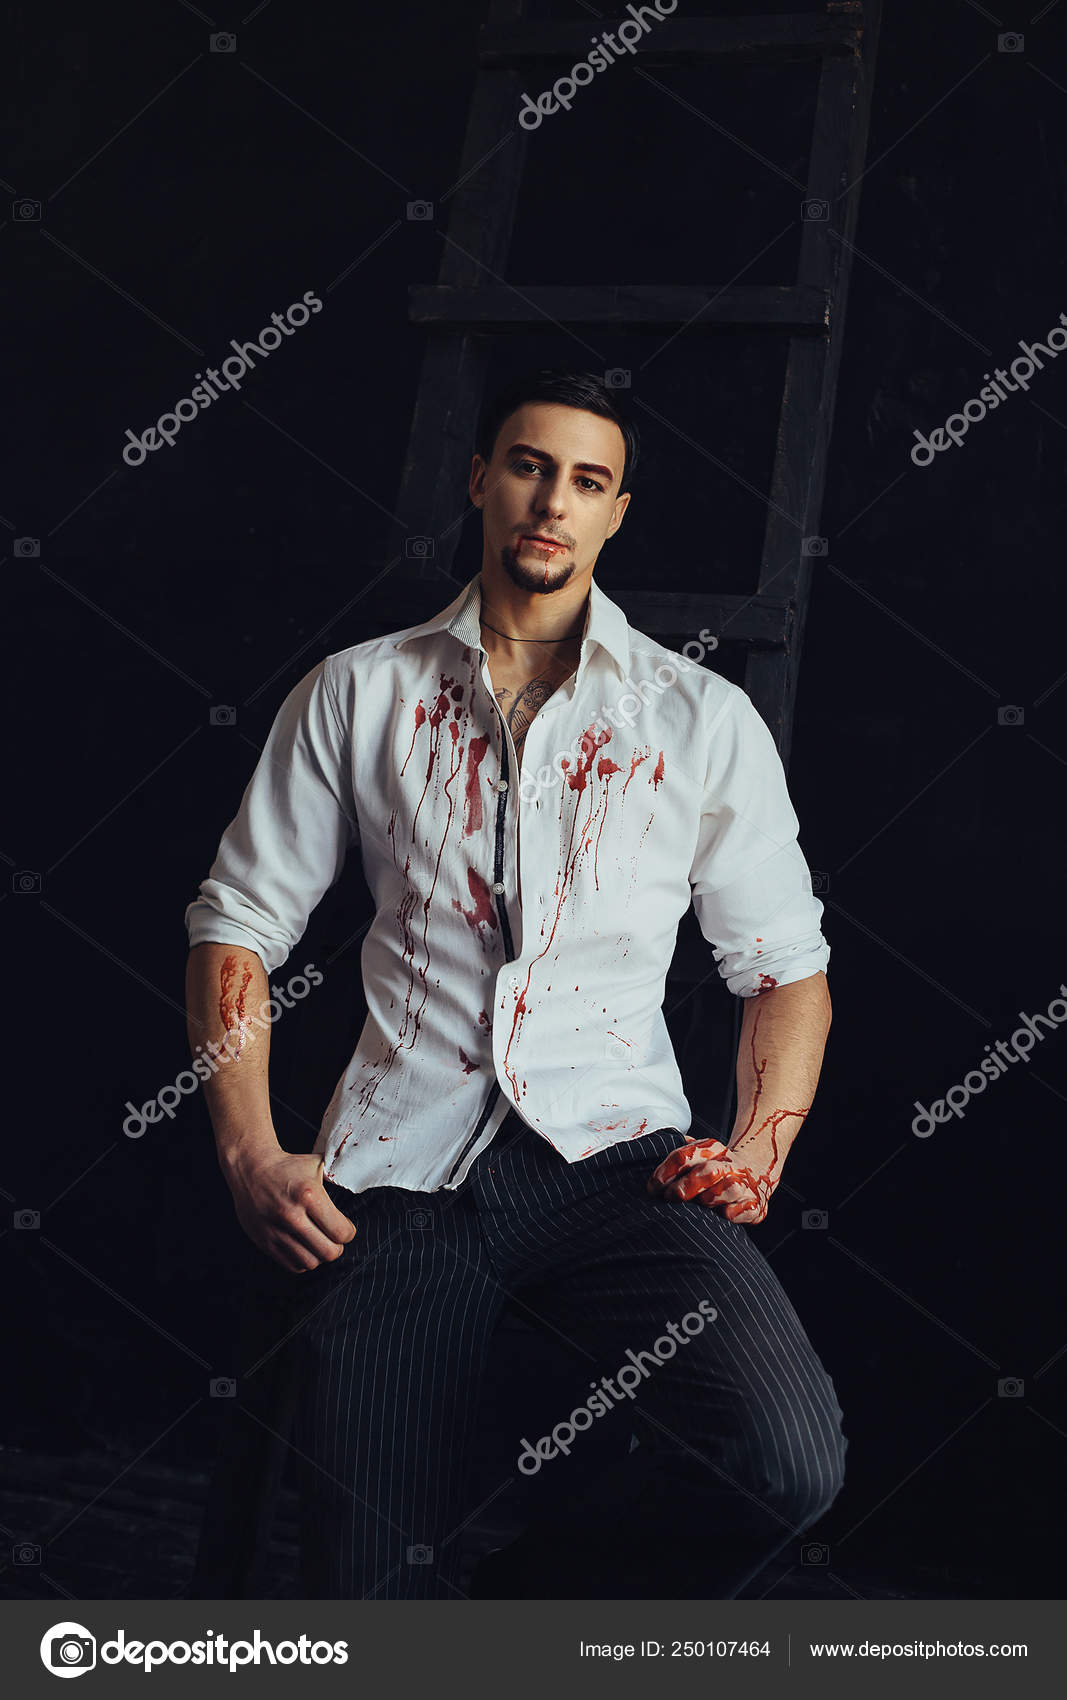 Hot Sexy Man With Dark Hair And Eyes Guy In White Bloody